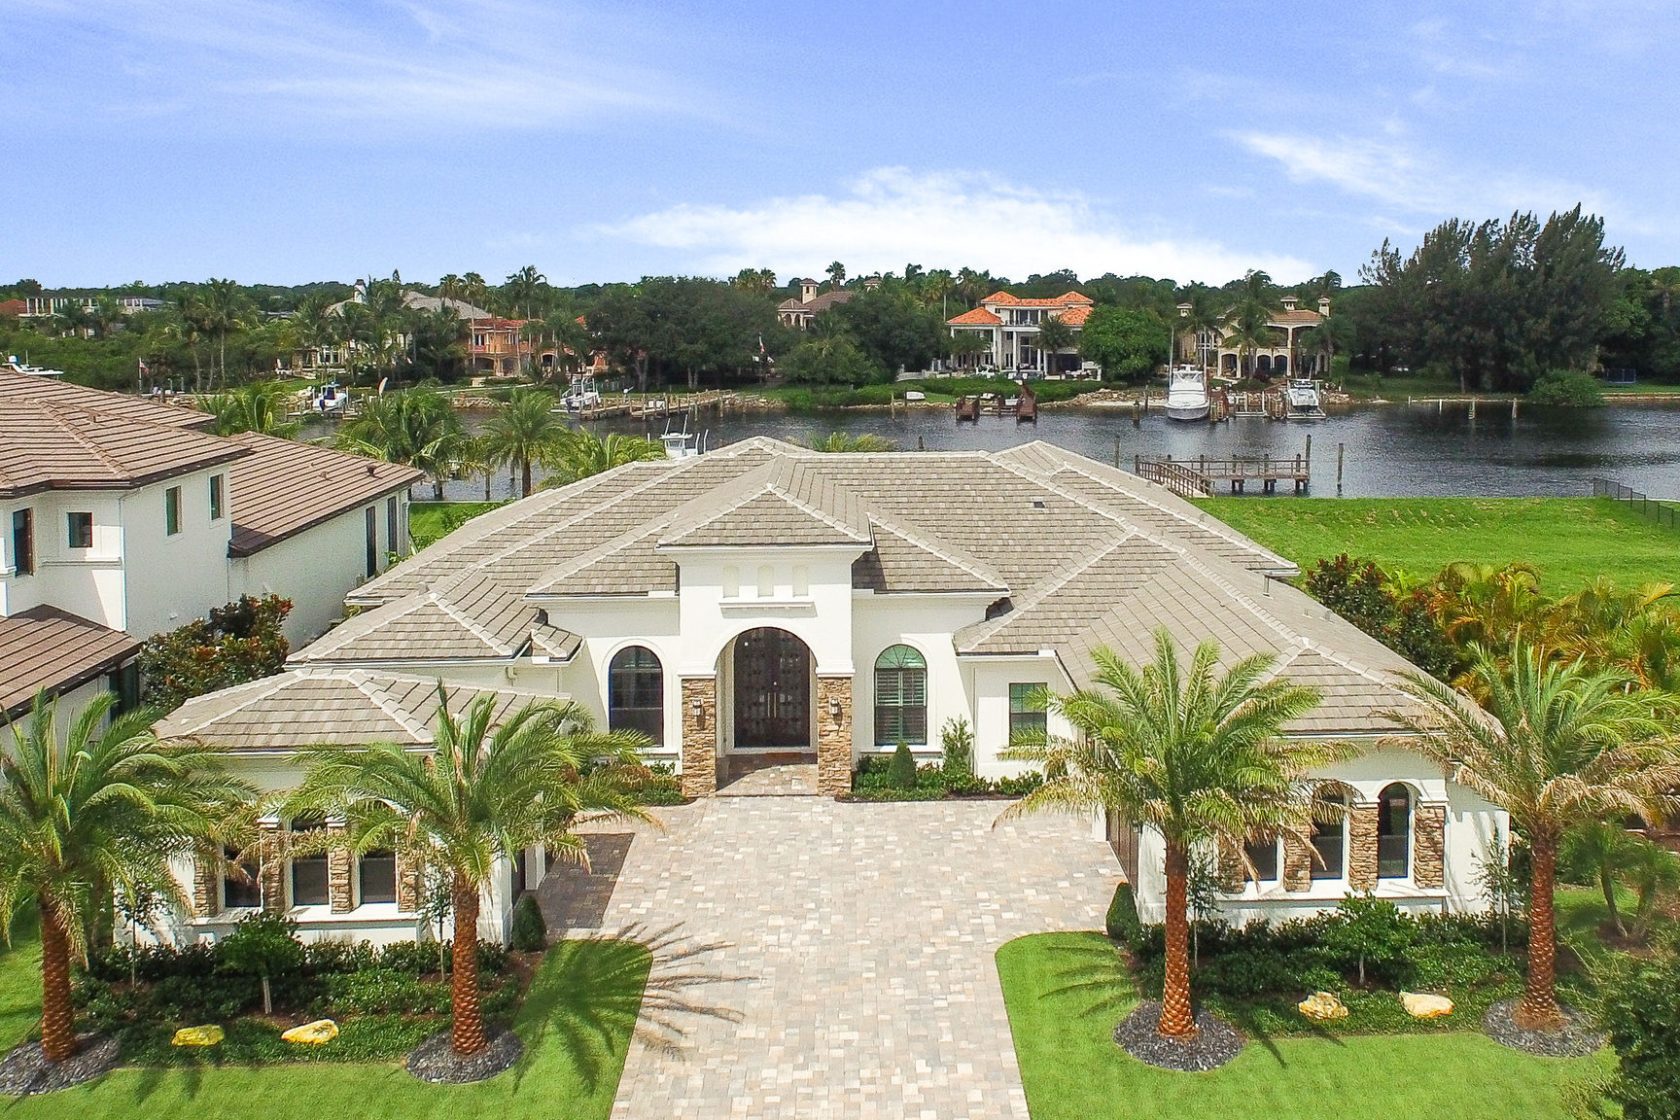 , Inside Dustin Johnson’s Florida homes he shares with Paulina Gretzky including stunning mansion with private island